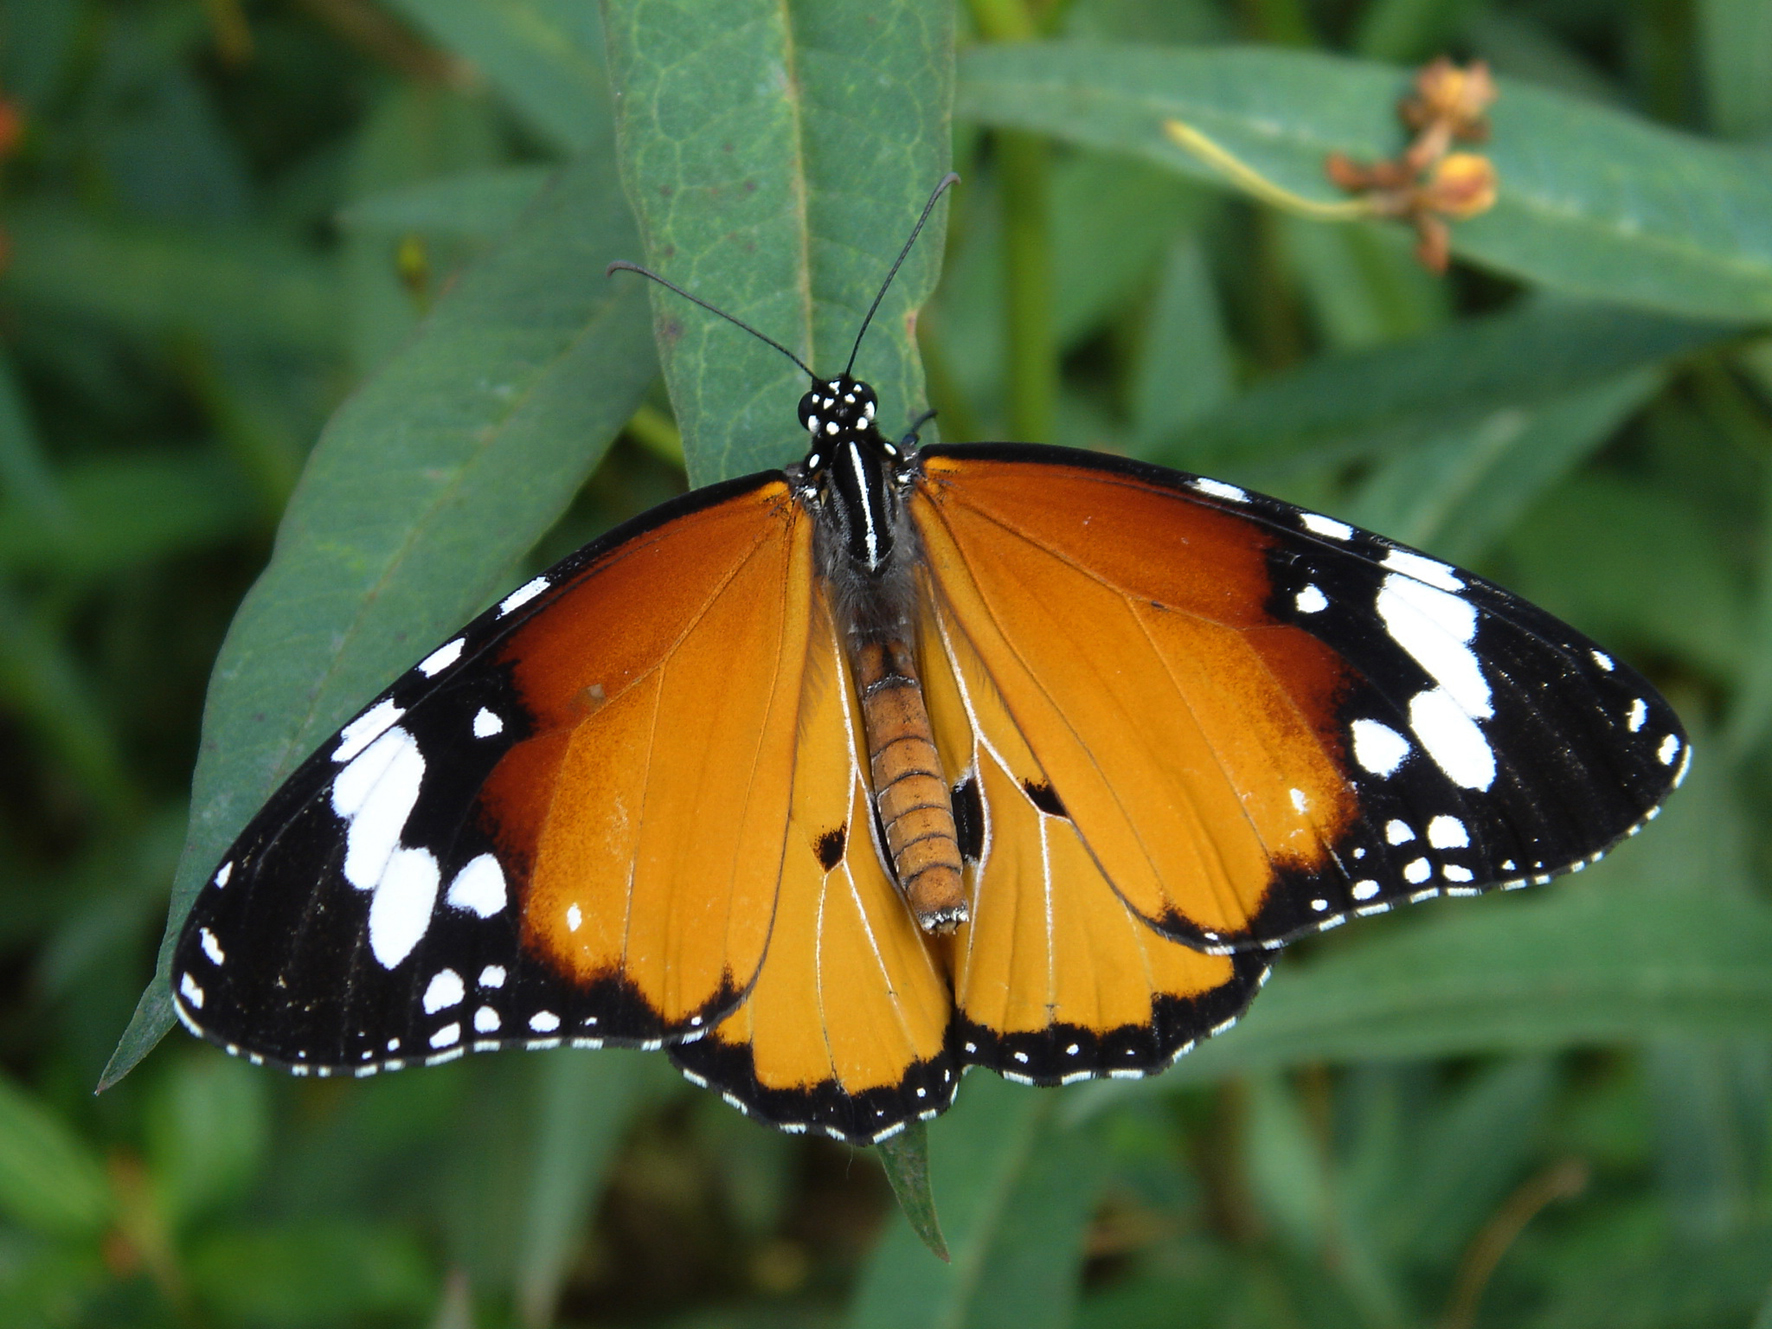 German butterfly experts export know-how - Helmholtz ...